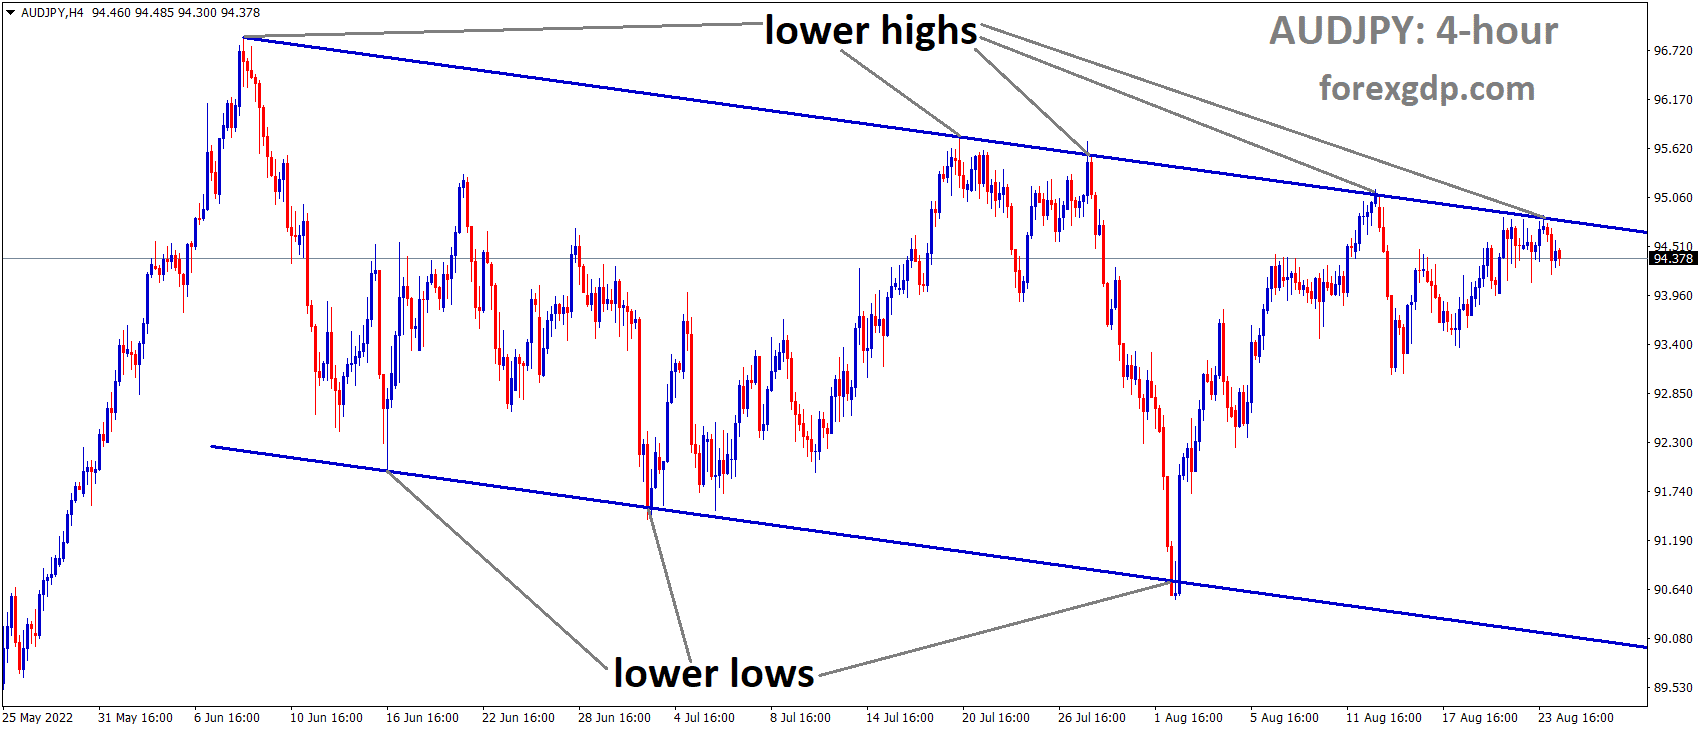 AUDJPY is moving in the Descending channel and the Market has fallen from the lower high area of the channel 1